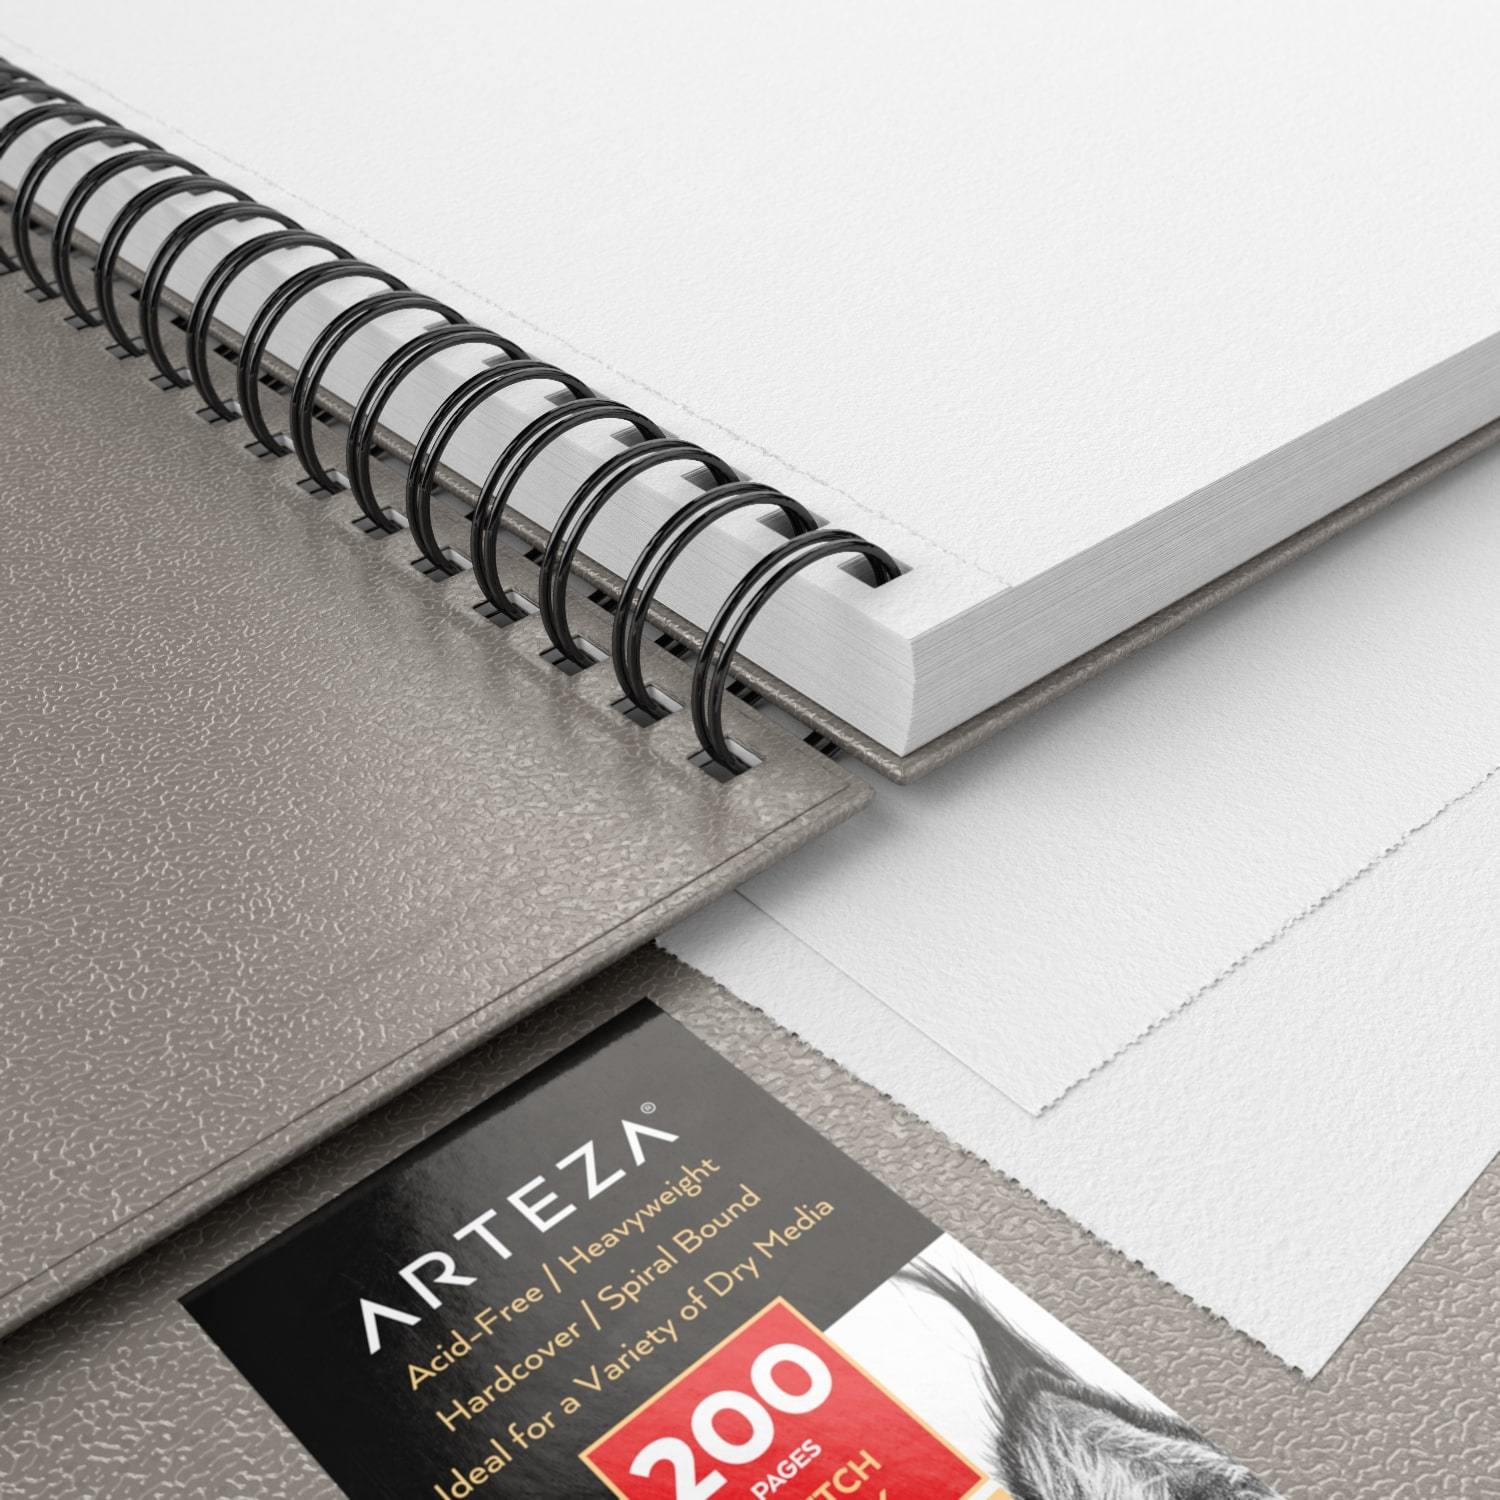  ARTEZA Drawing Pad 9 x 12 Inches, Pack of 2, 160 Sheets  (80lb/130g), Spiral Bound Artist Drawing Books, 80 Sheets Each, Durable  Acid Free Sketch Paper, Ideal for Adults & Teens